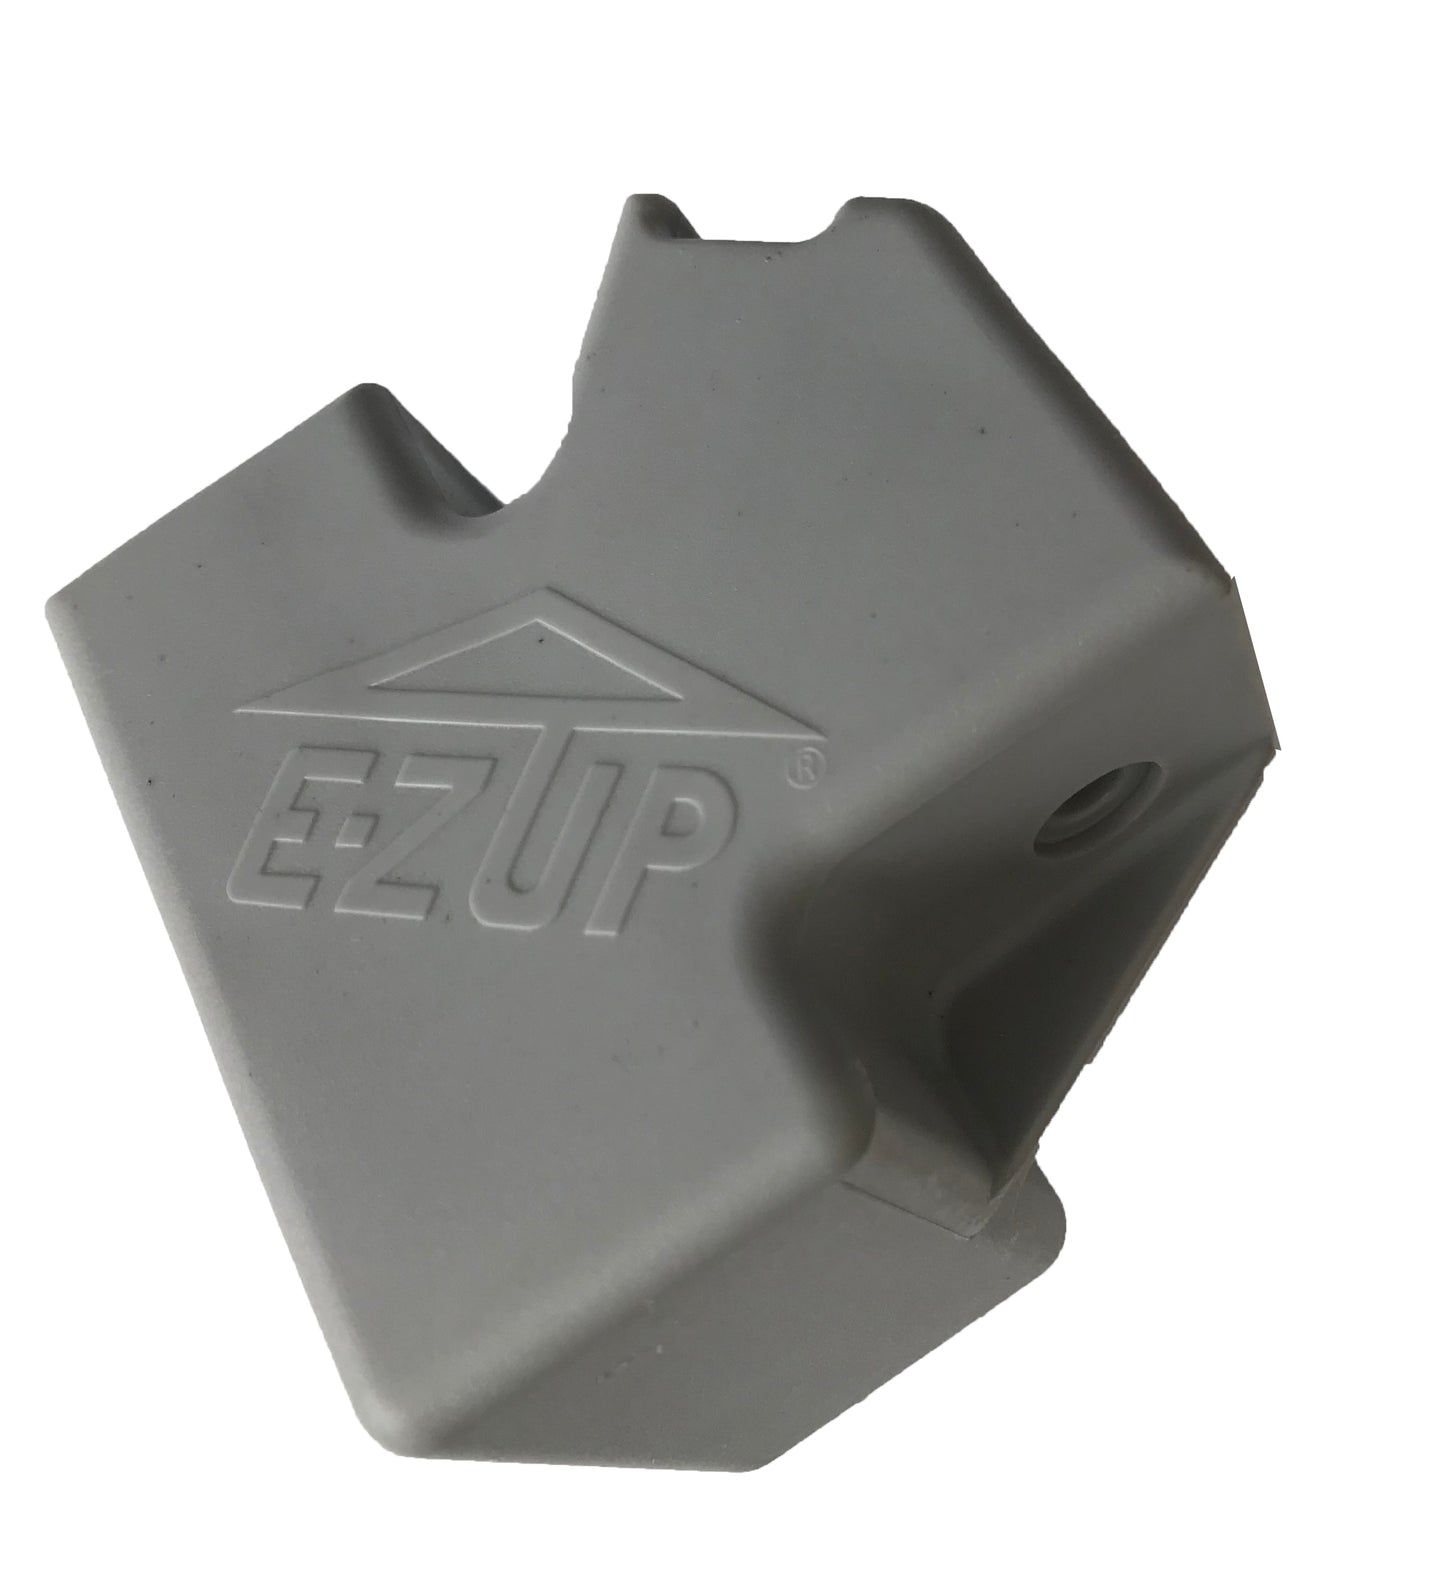 Featured here are Upper Leg Cap Connector Replacement Parts engineered for the E-Z UP 10" x 10" Straight Leg Canopy. These replacement components are vital for maintaining the structural integrity of your canopy, guaranteeing a secure and durable shelter for your outdoor activities.